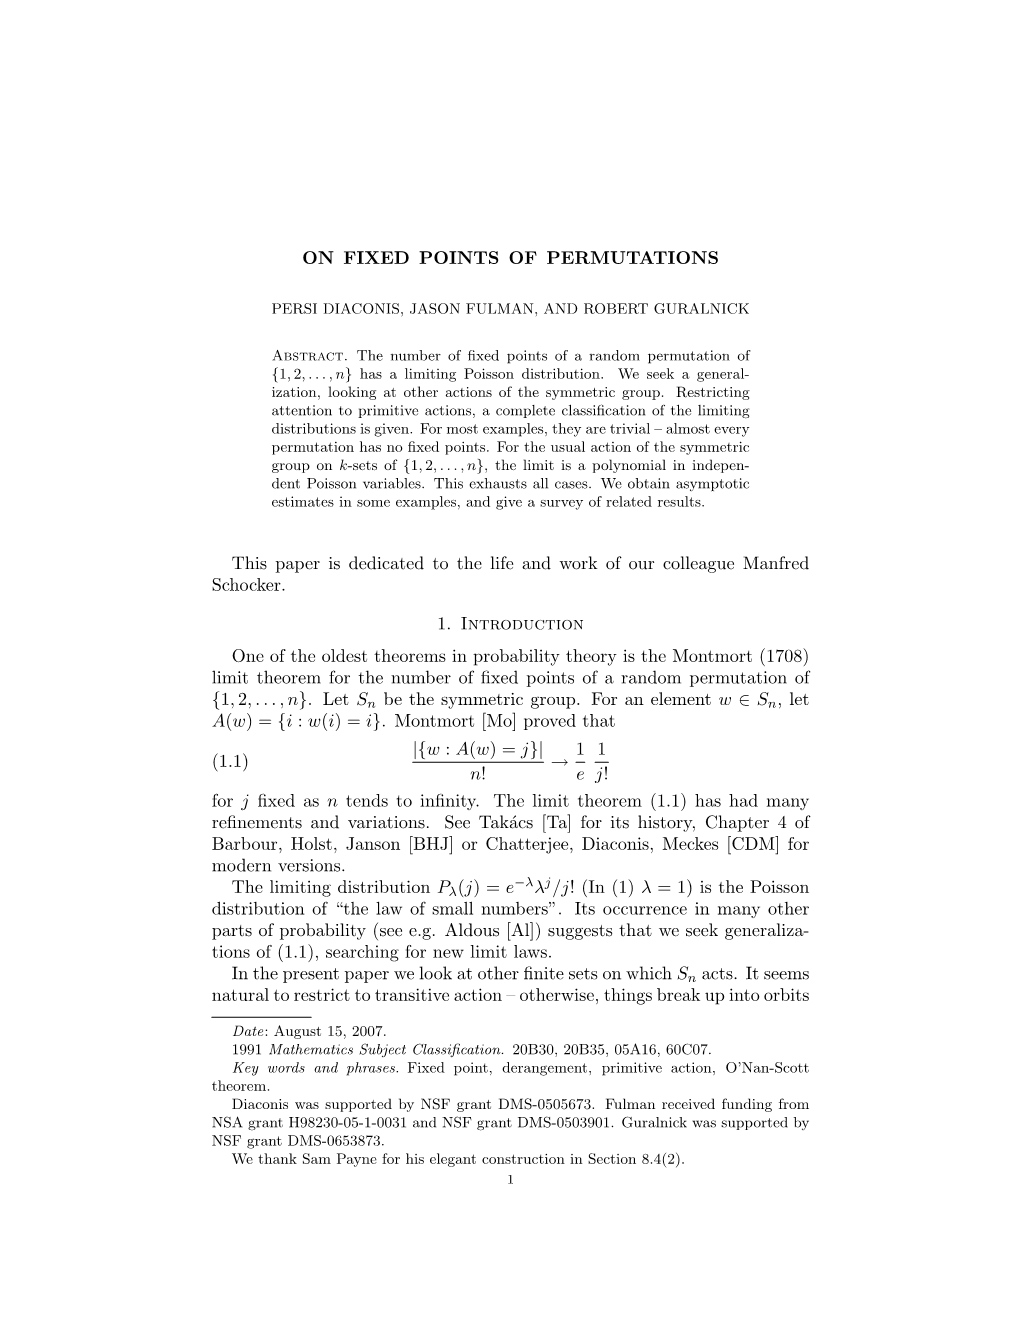 On Fixed Points of Permutations